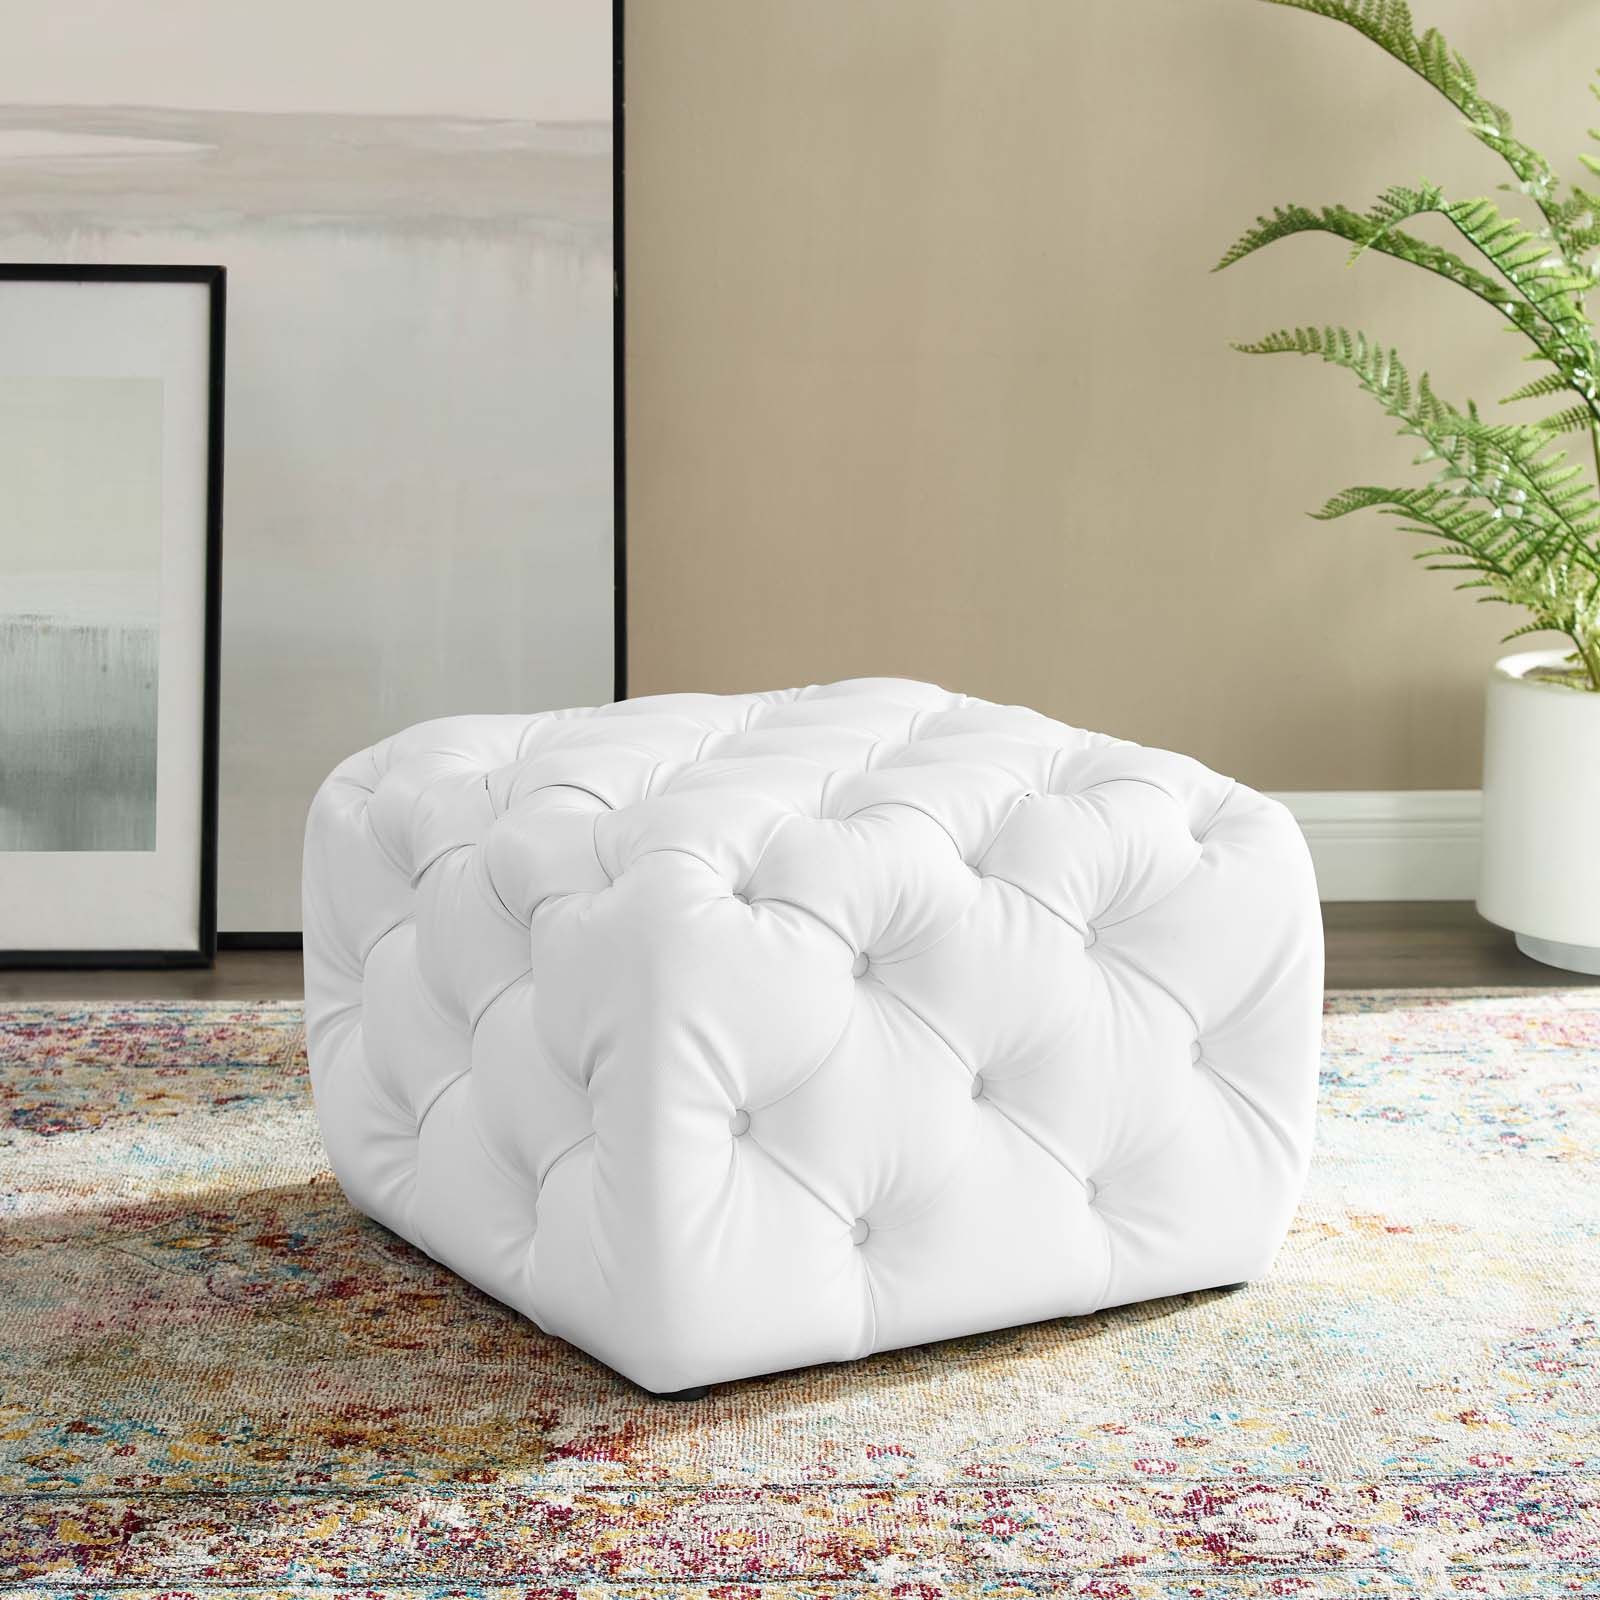 Anthem Tufted Button Square Faux Leather Ottoman White With Regard To White Leatherette Ottomans (View 1 of 20)